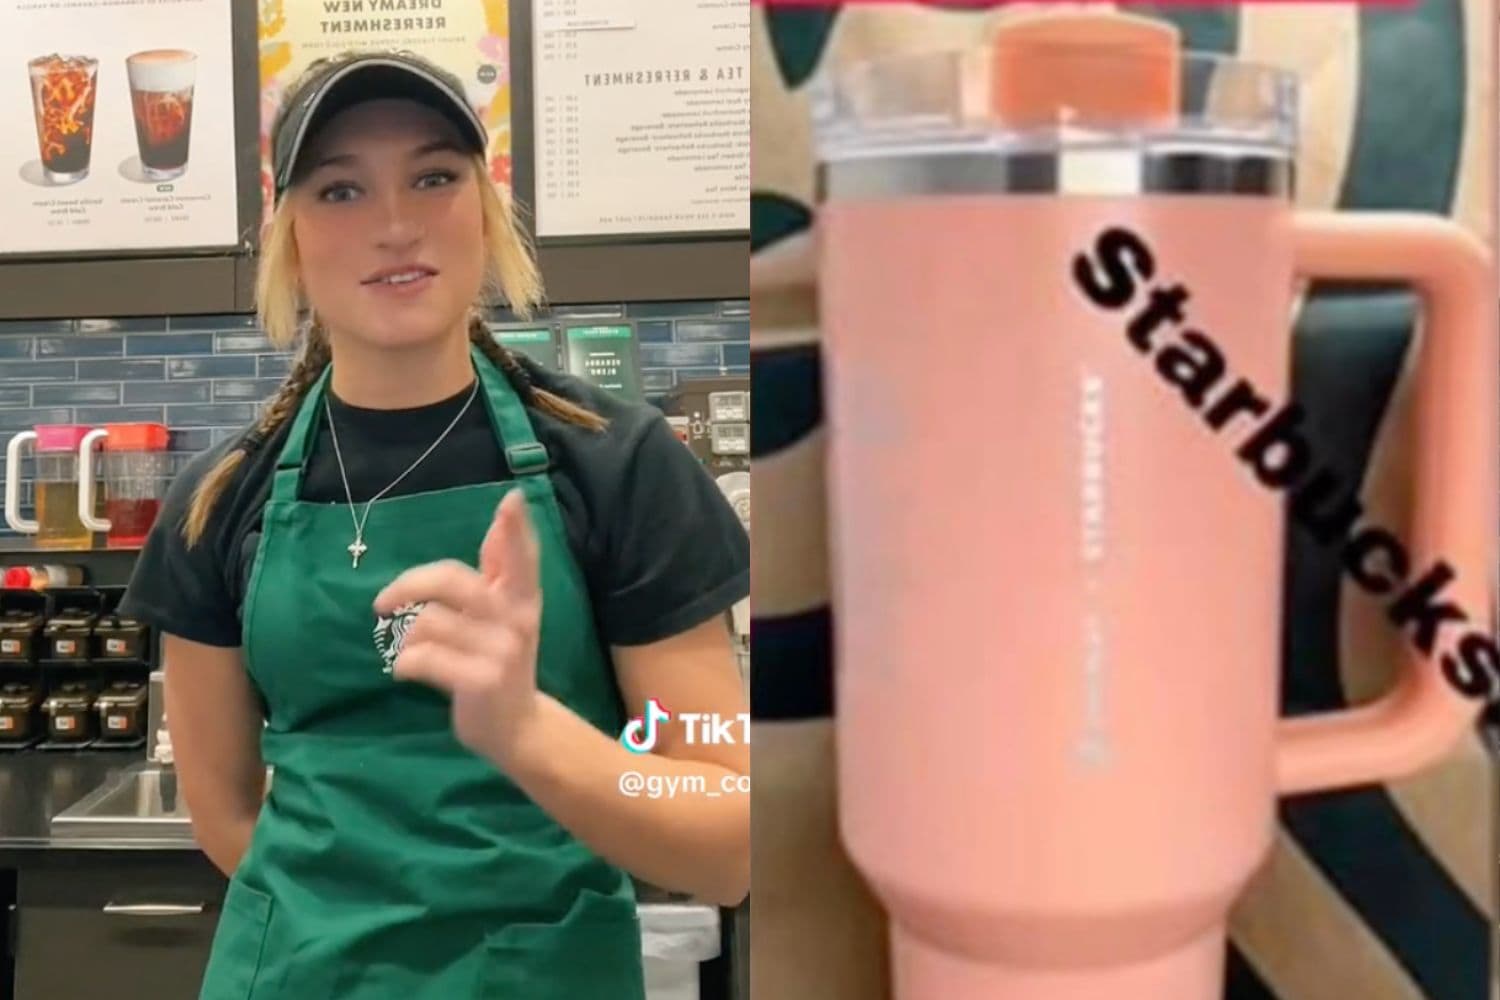 A Mean Girls Pink Starbucks Stanley Cup Is Coming to Target This